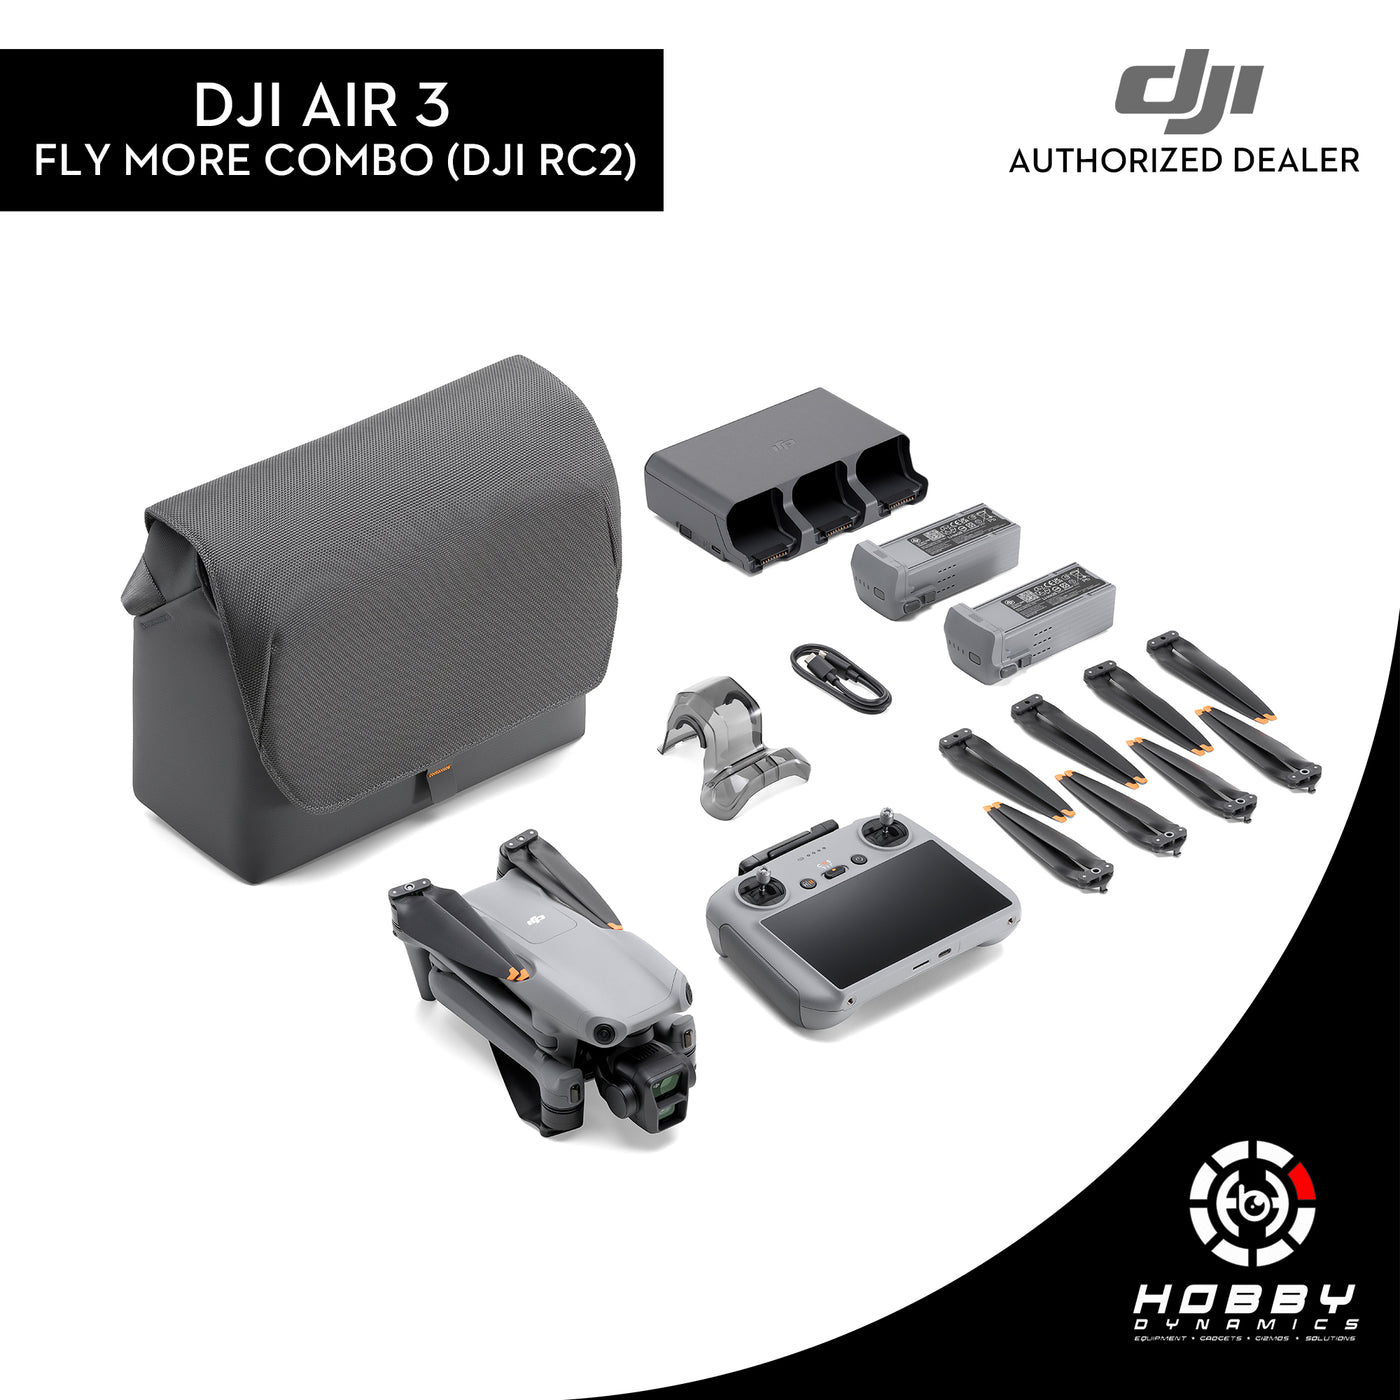 DJI Air 3 Fly More Combo w/ (DJI RC 2) with FREE Sandisk Extreme 64GB SD Card